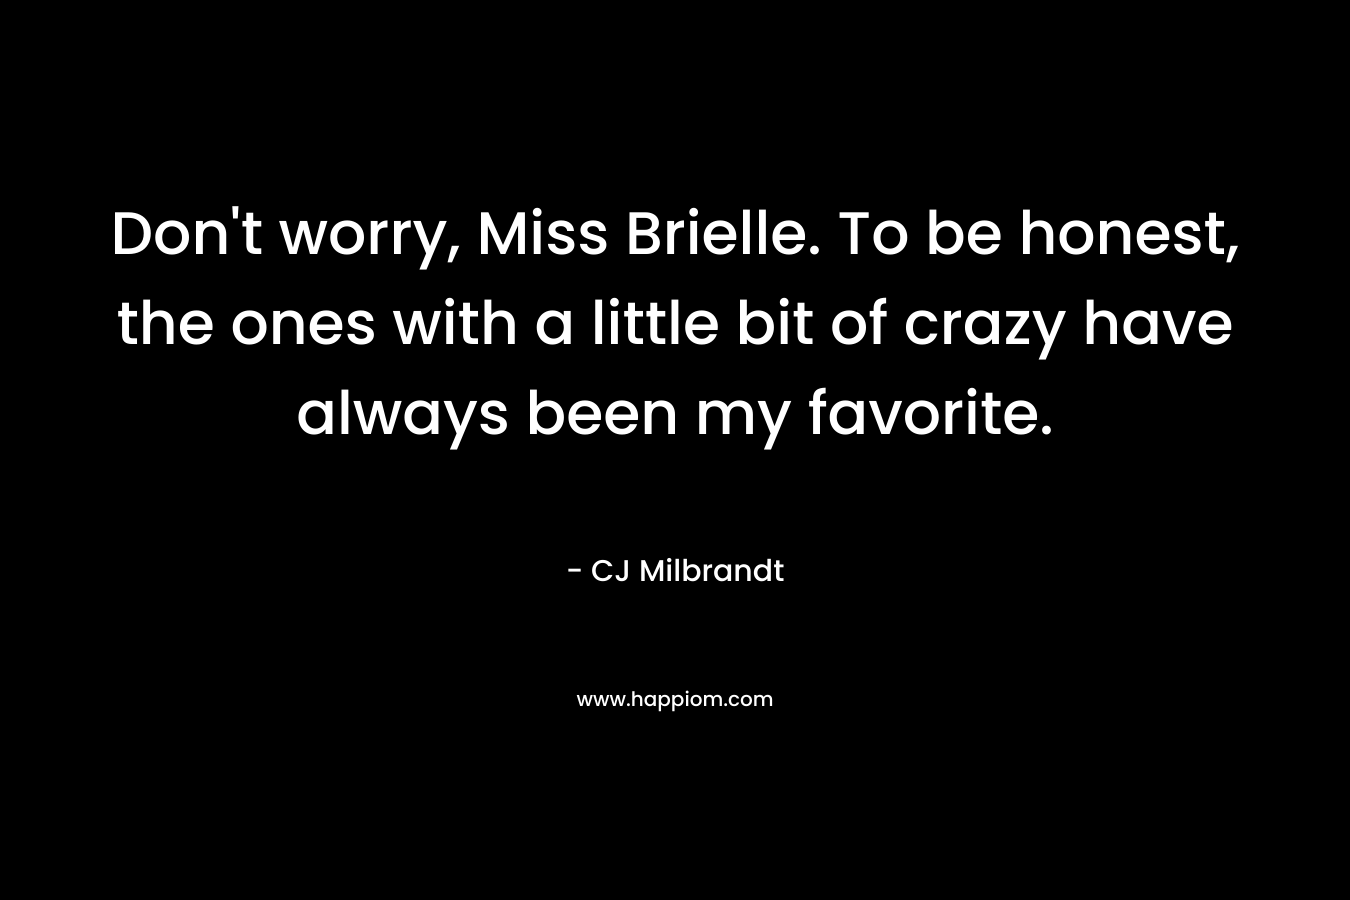 Don't worry, Miss Brielle. To be honest, the ones with a little bit of crazy have always been my favorite.